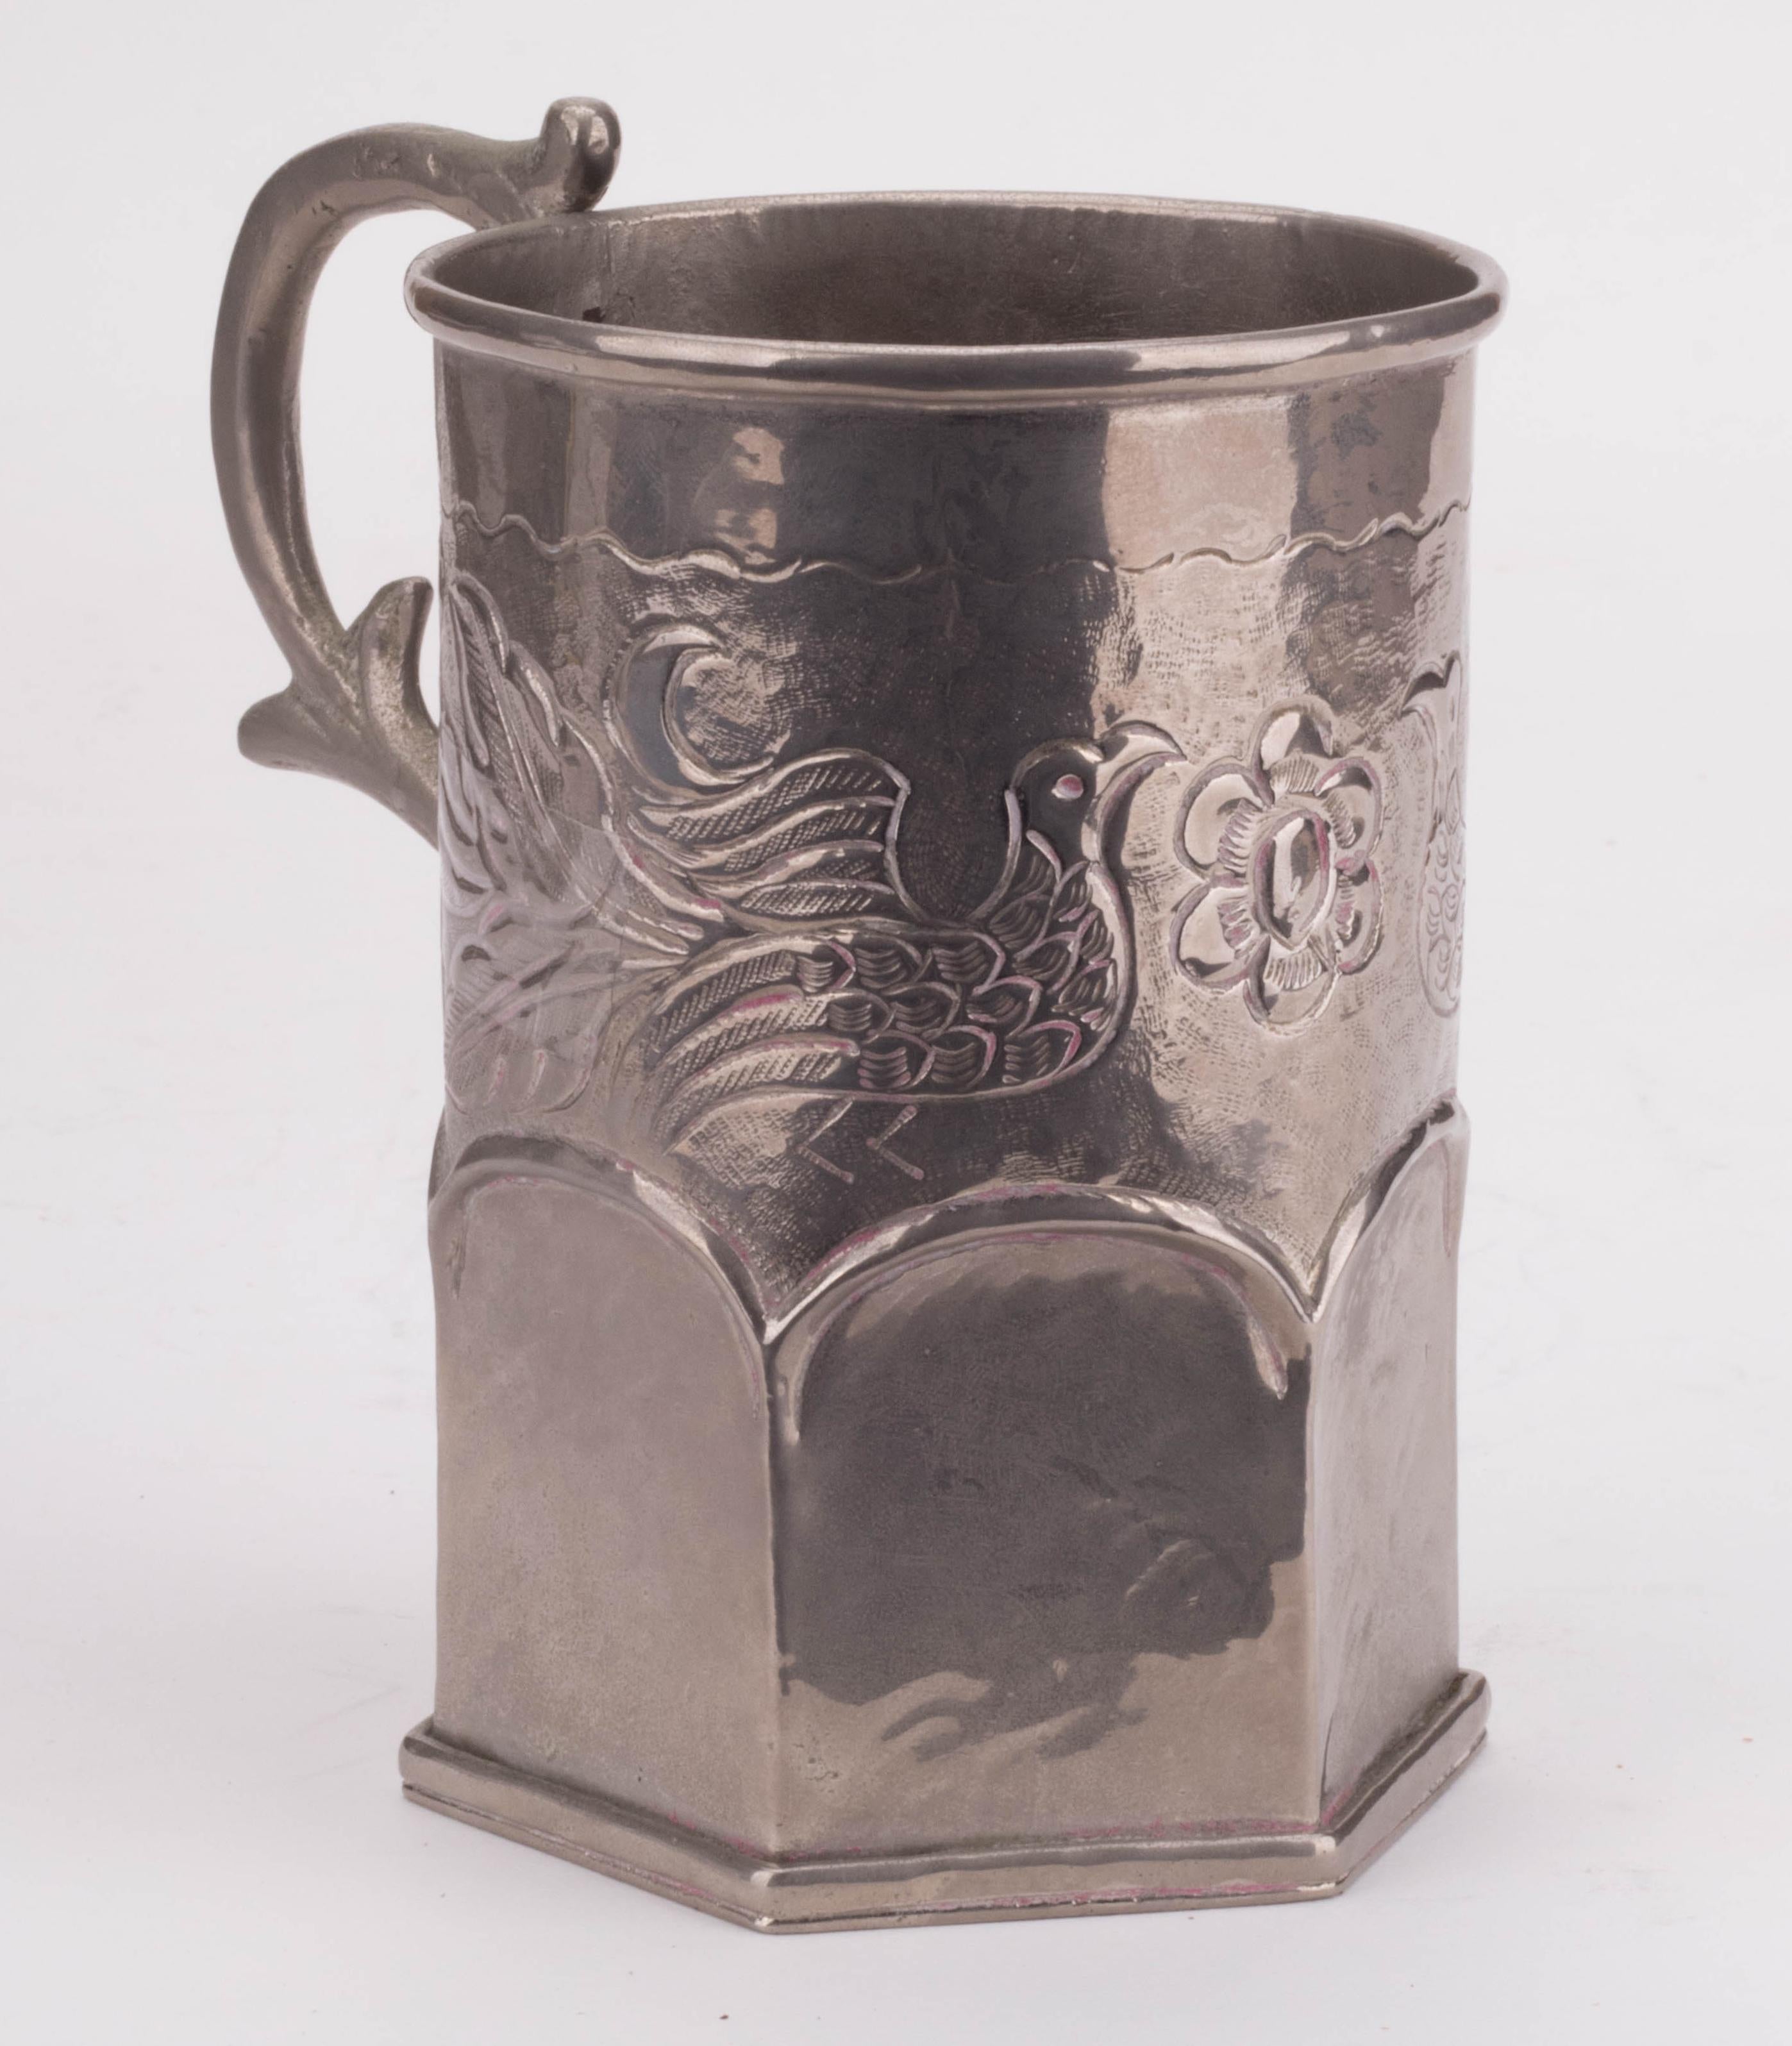 19th century silvered metal jug with floral engravings. 

Weight: 303g.